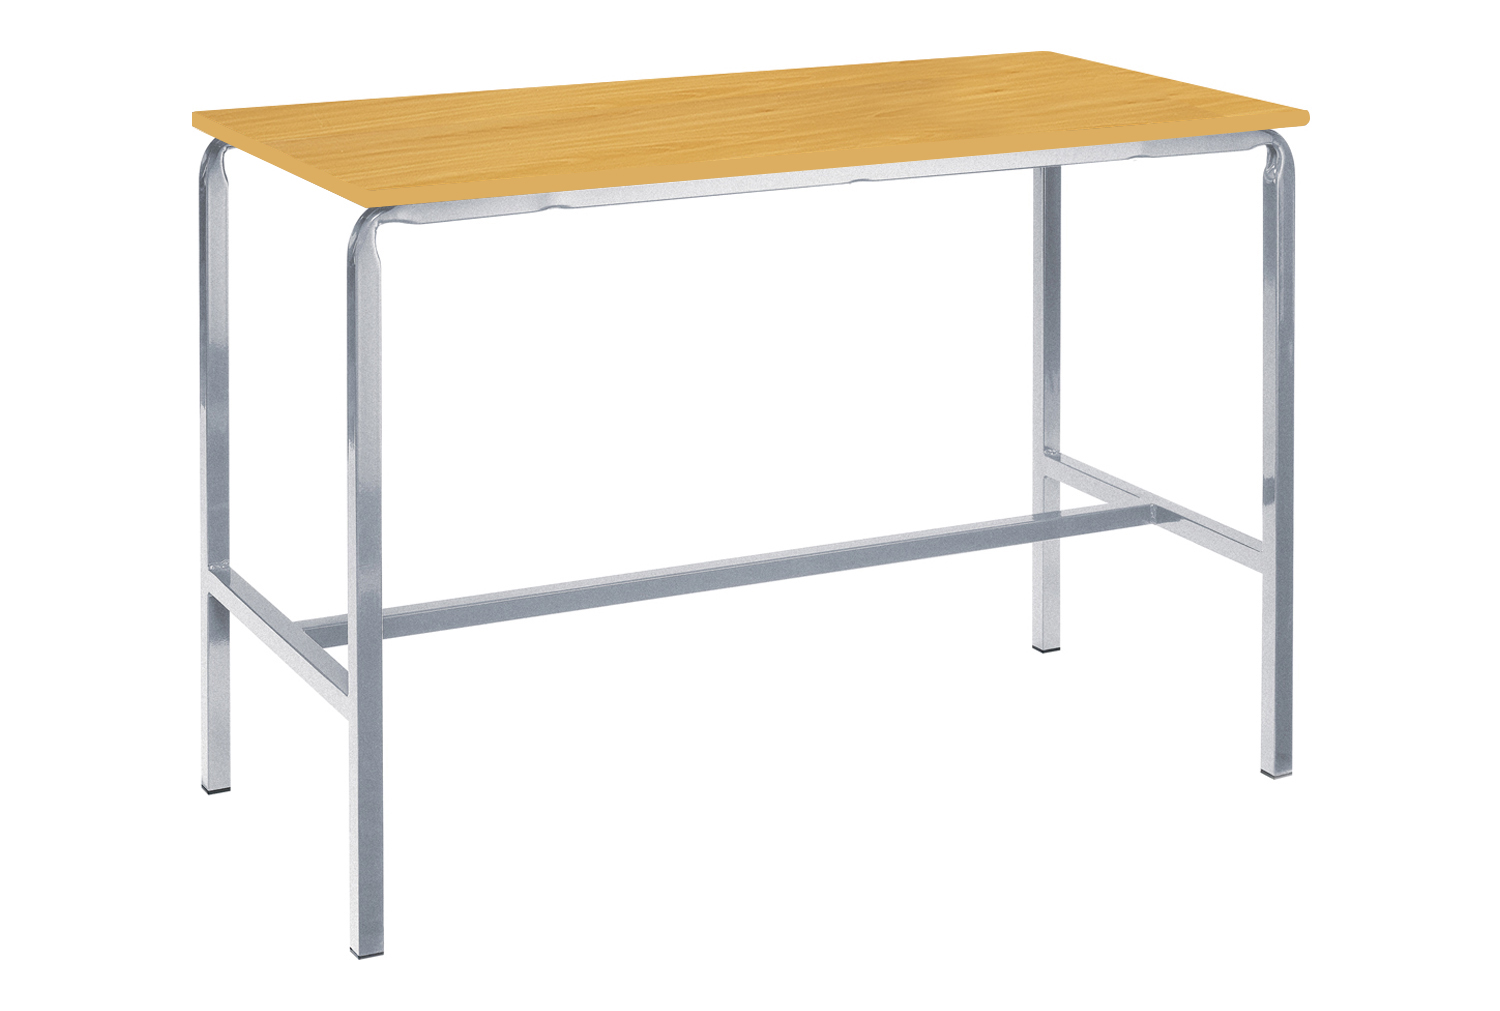 Qty 2 - Crush Bent Craft Tables (MDF Edge), 120wx60dx95h (cm), Speckled Grey Frame, Beech